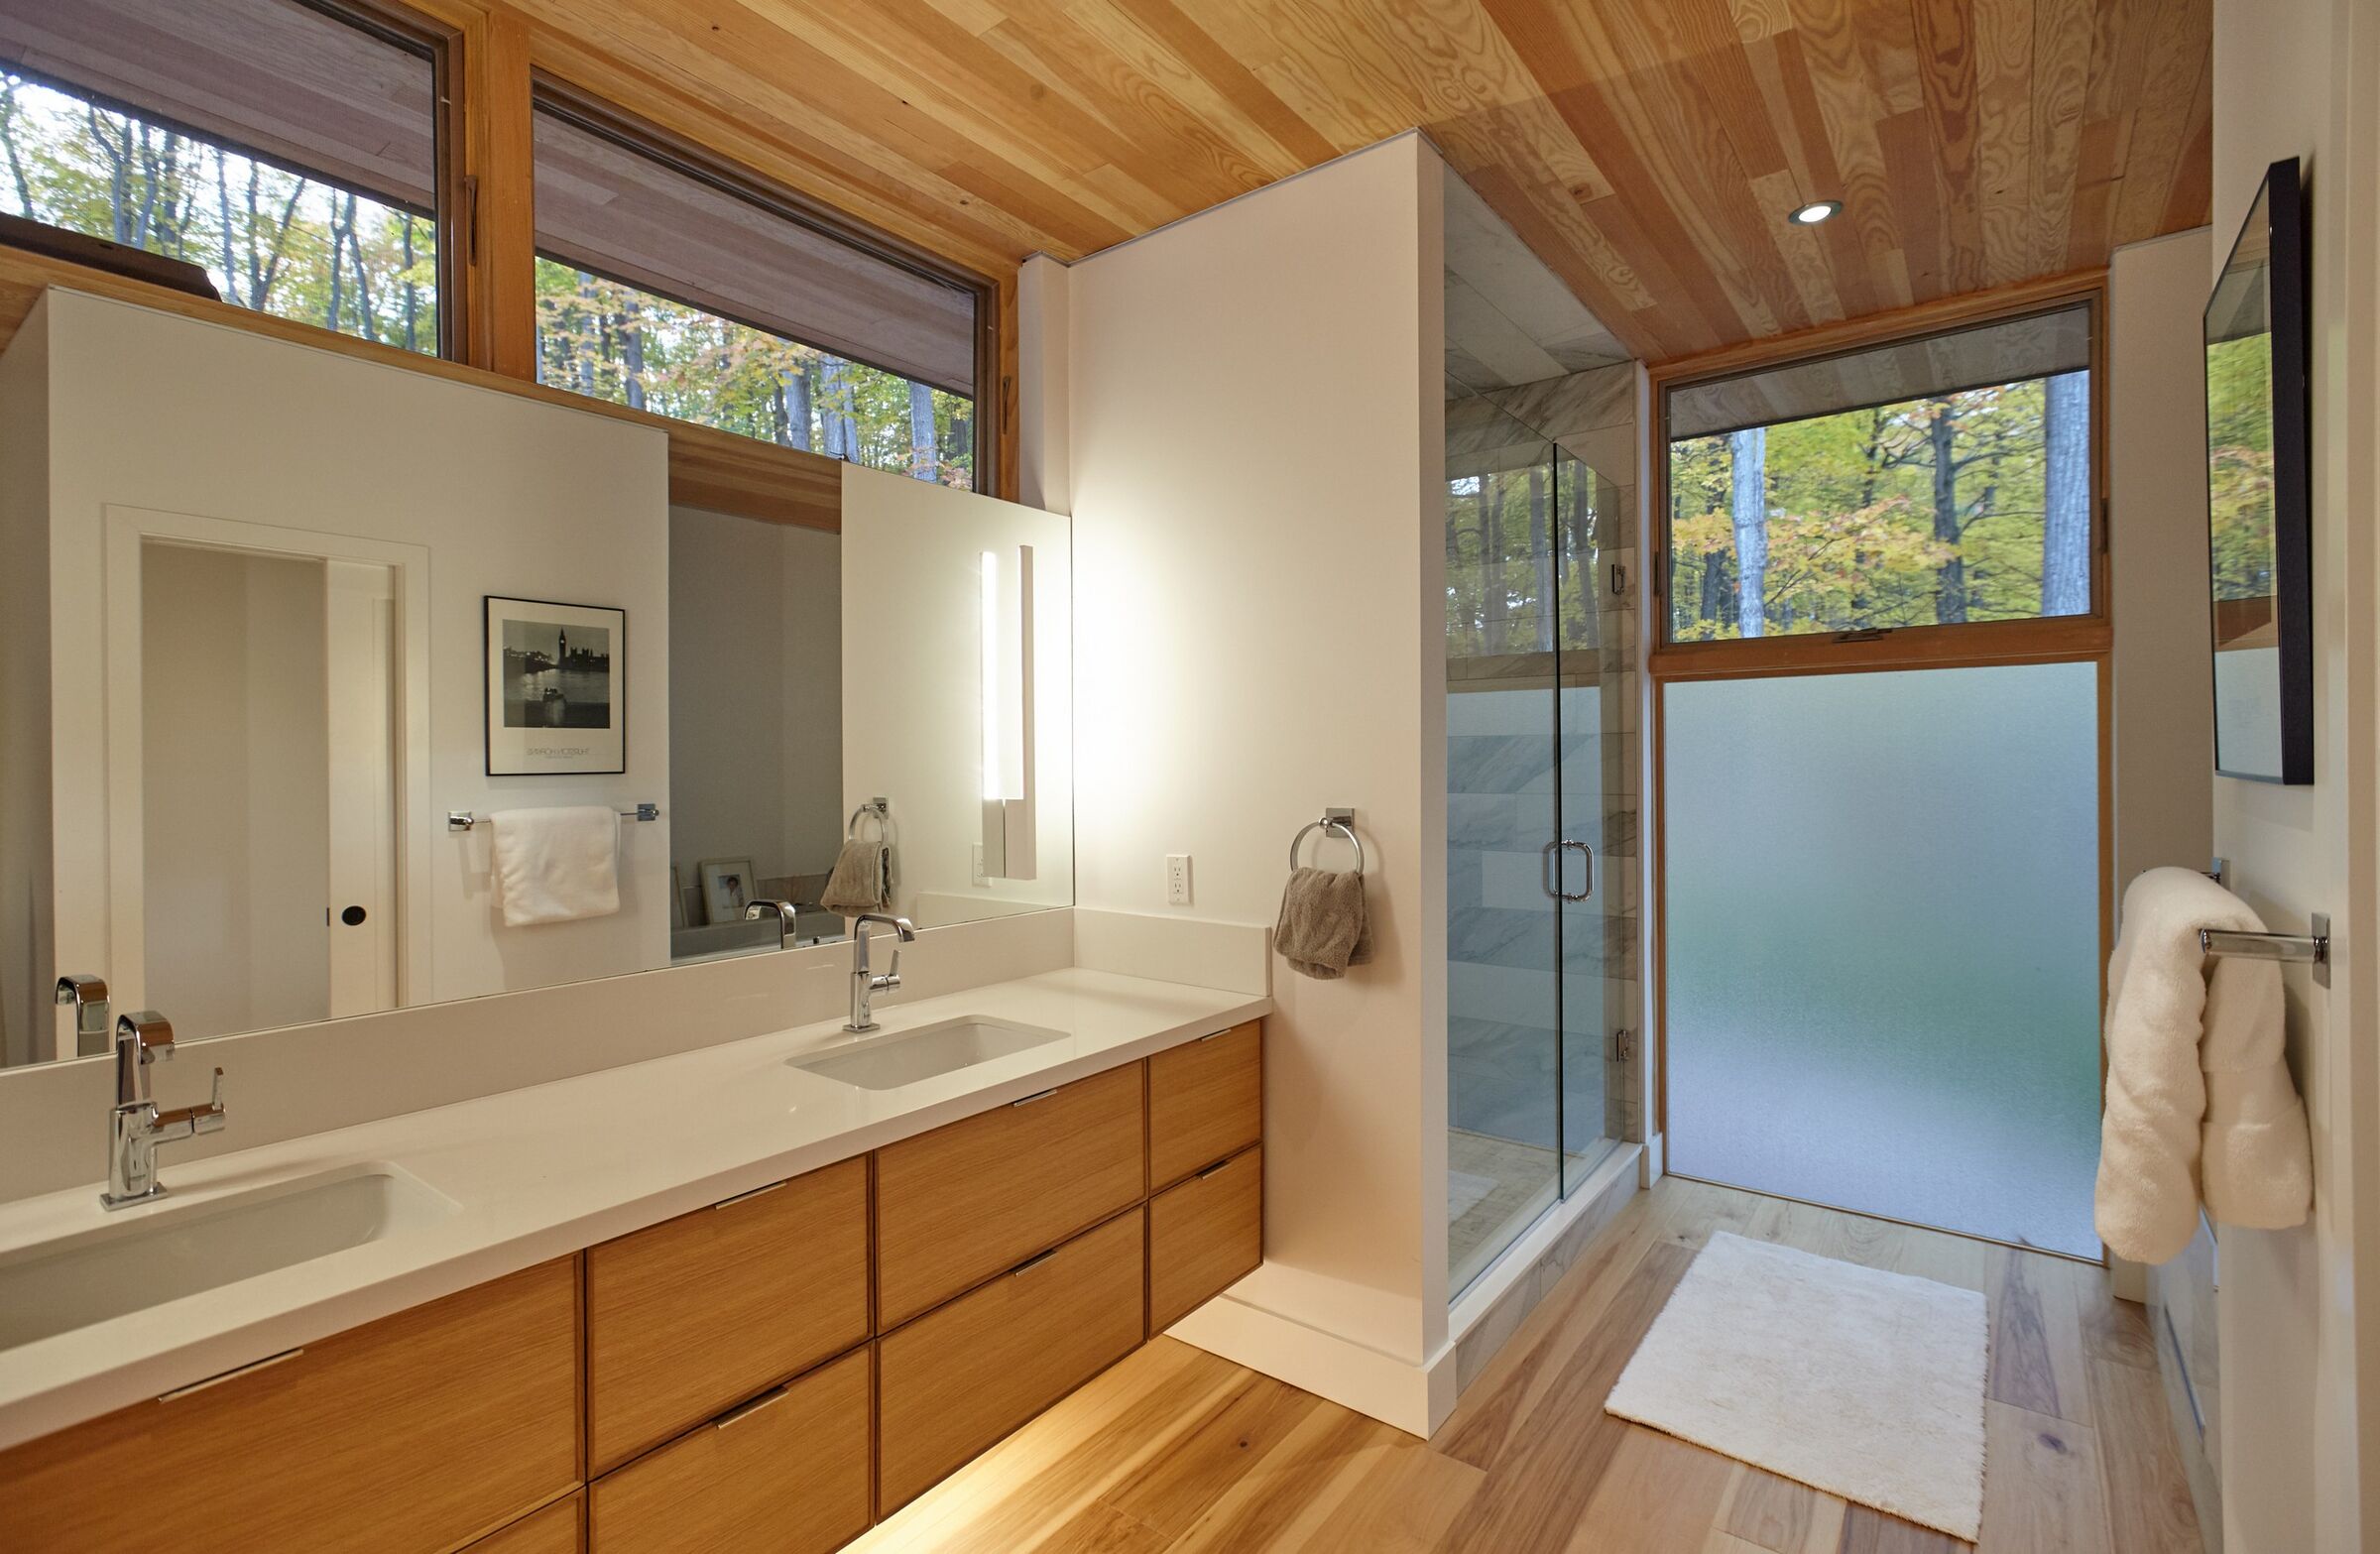 Modern bathroom with windows around the celling